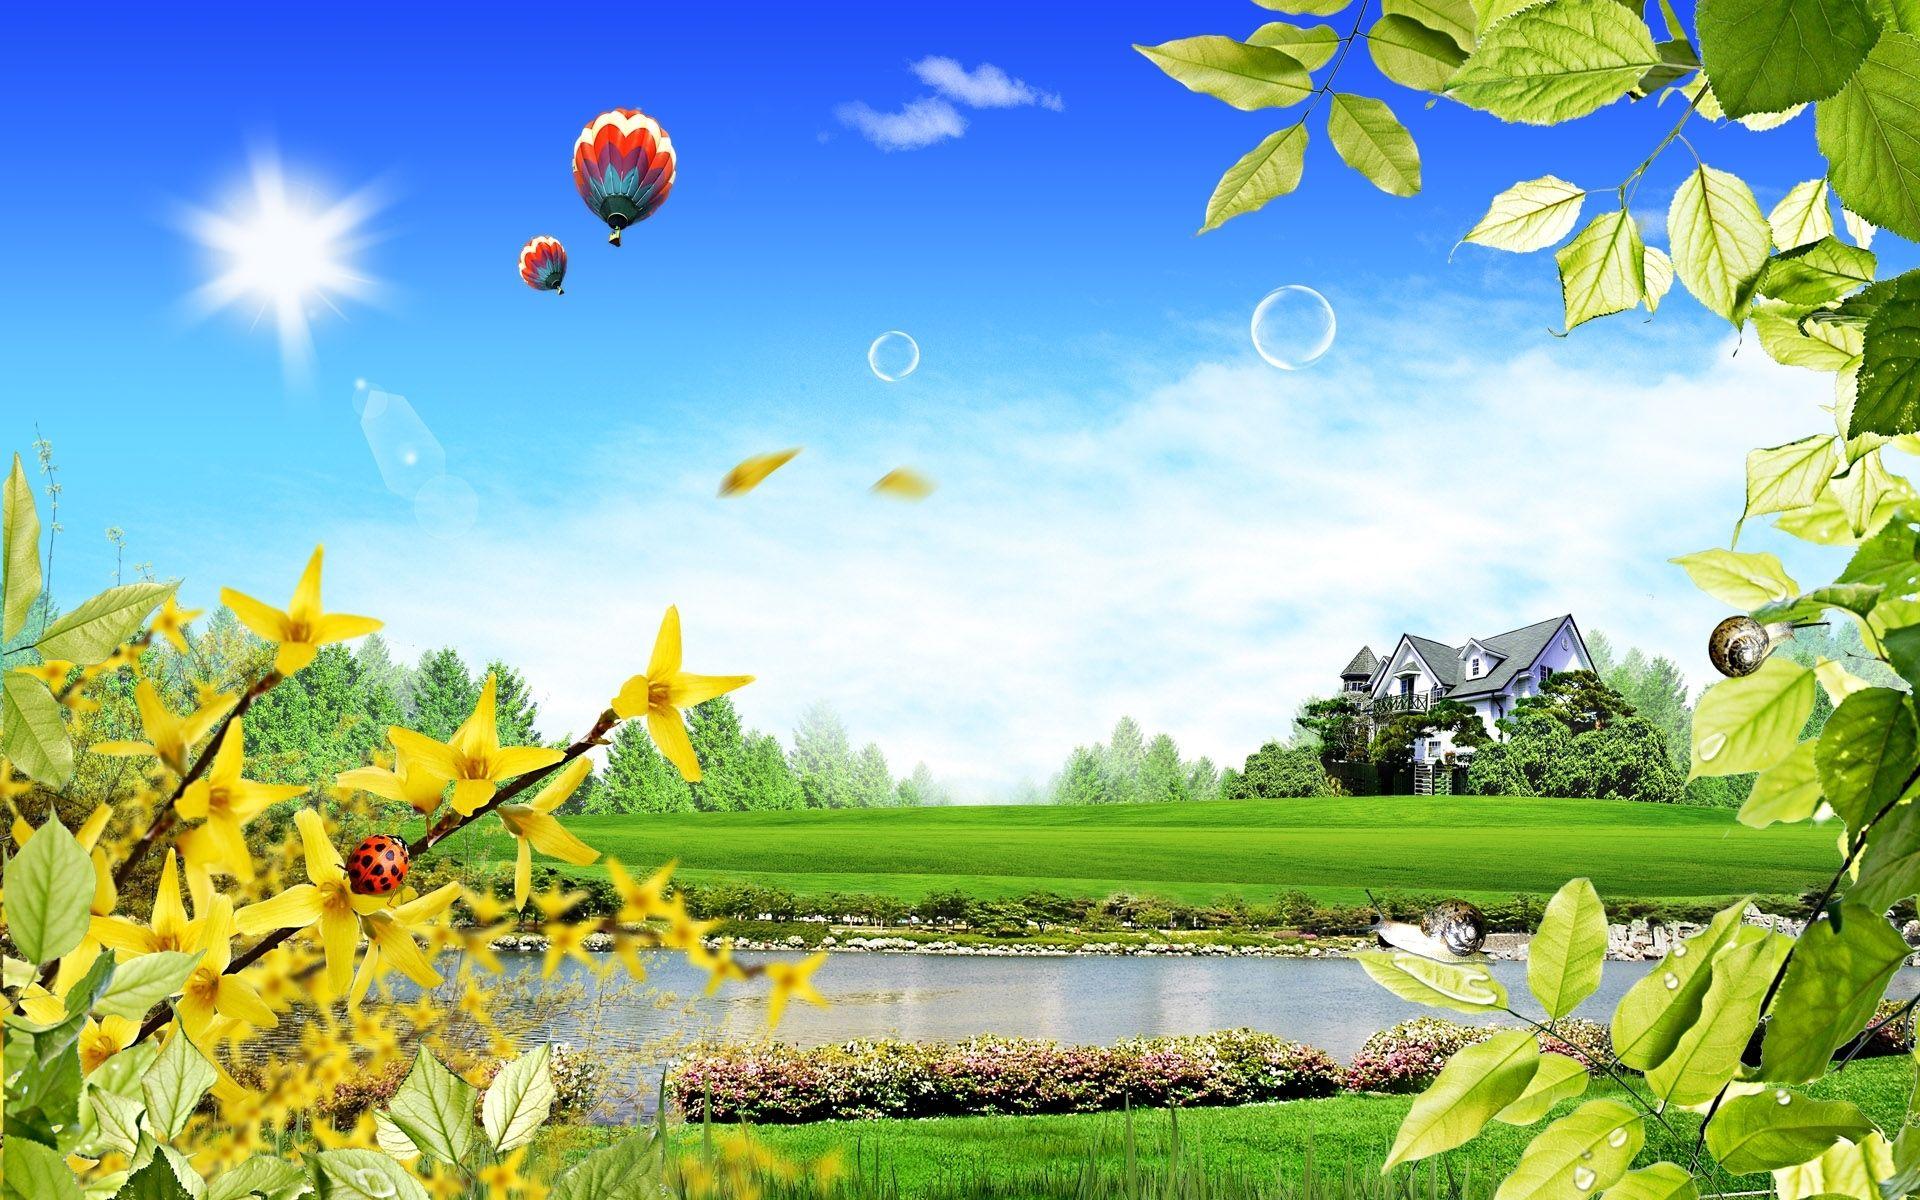 Wallpaper.wiki 3D Beautiful Scenery Hd Picture PIC WPE0013438